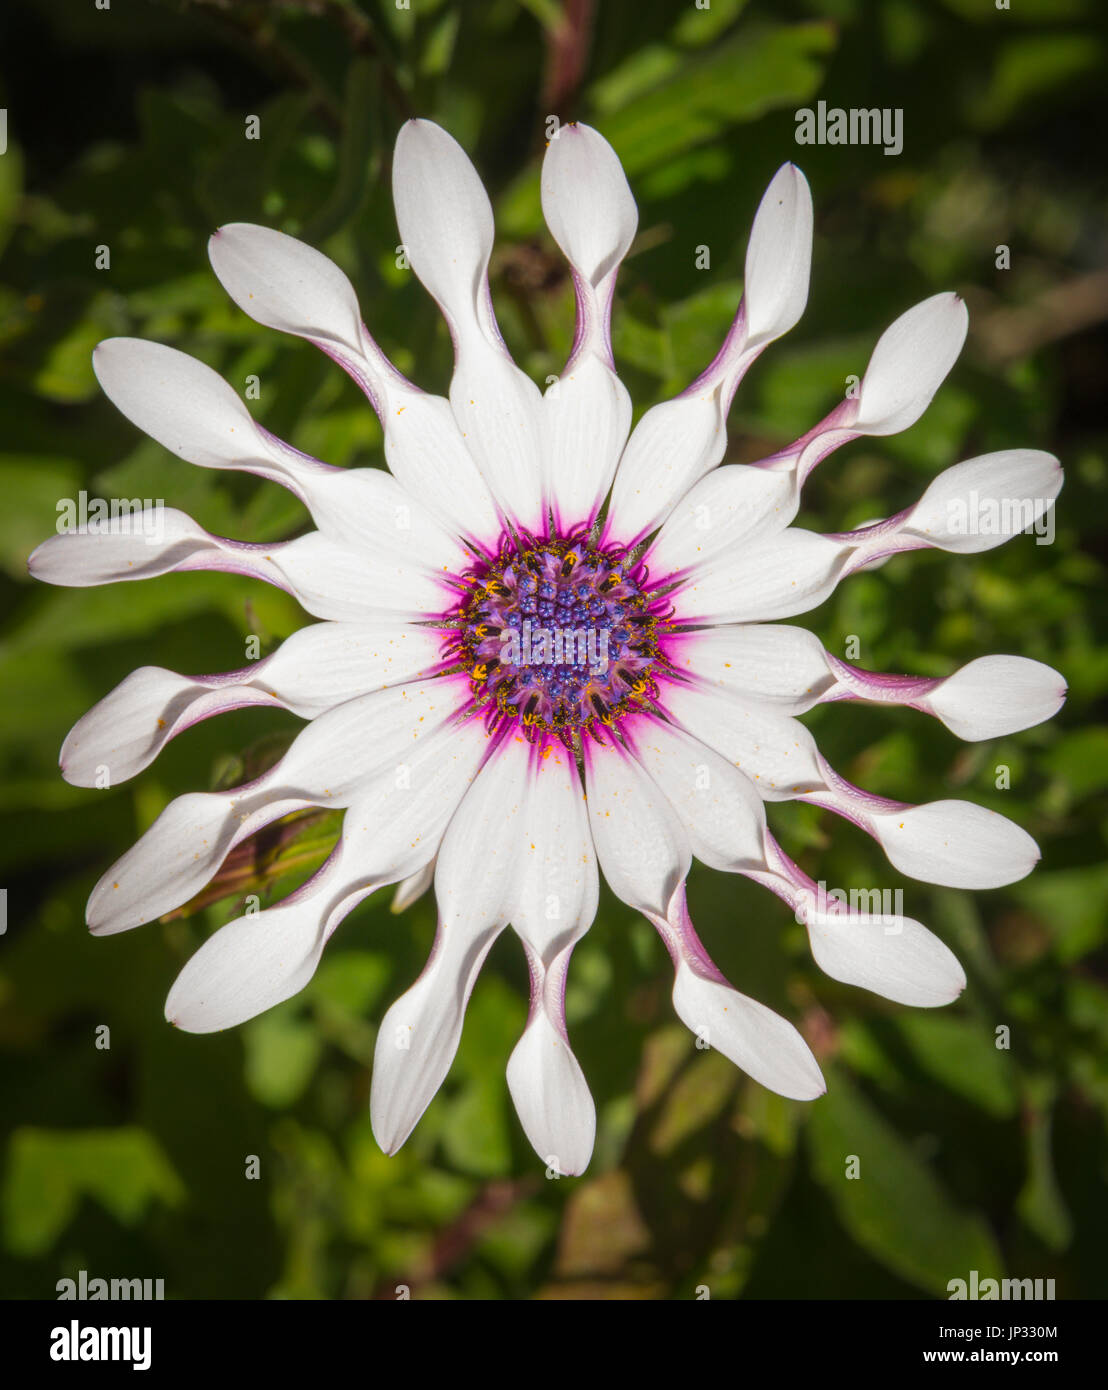 Osteospermum fruticosum, also called shrubby daisybush or trailing African daisy is a flowering plant native to South Africa Stock Photo